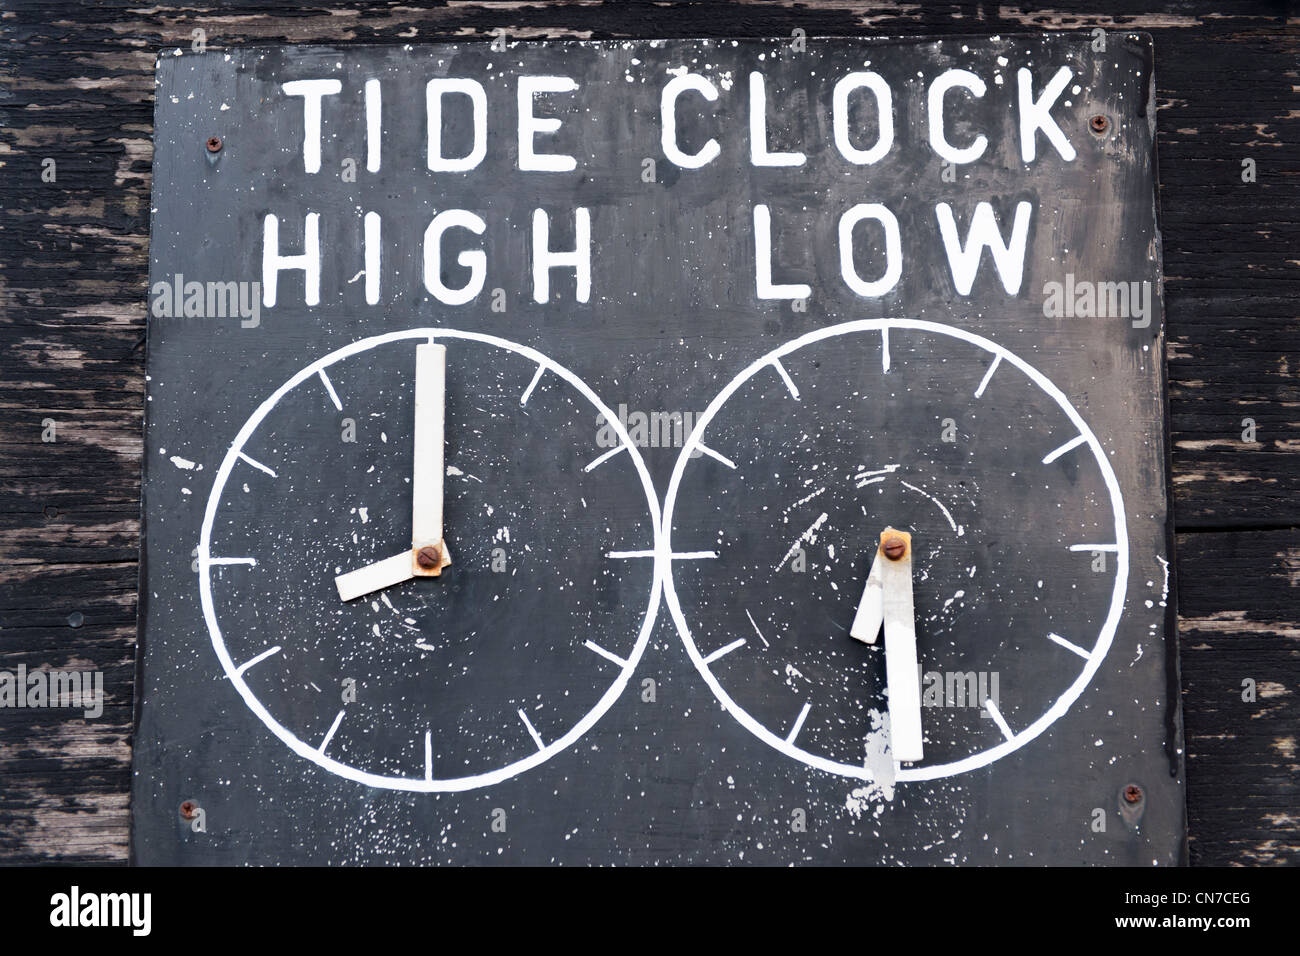 High and Low tide clocks Stock Photo